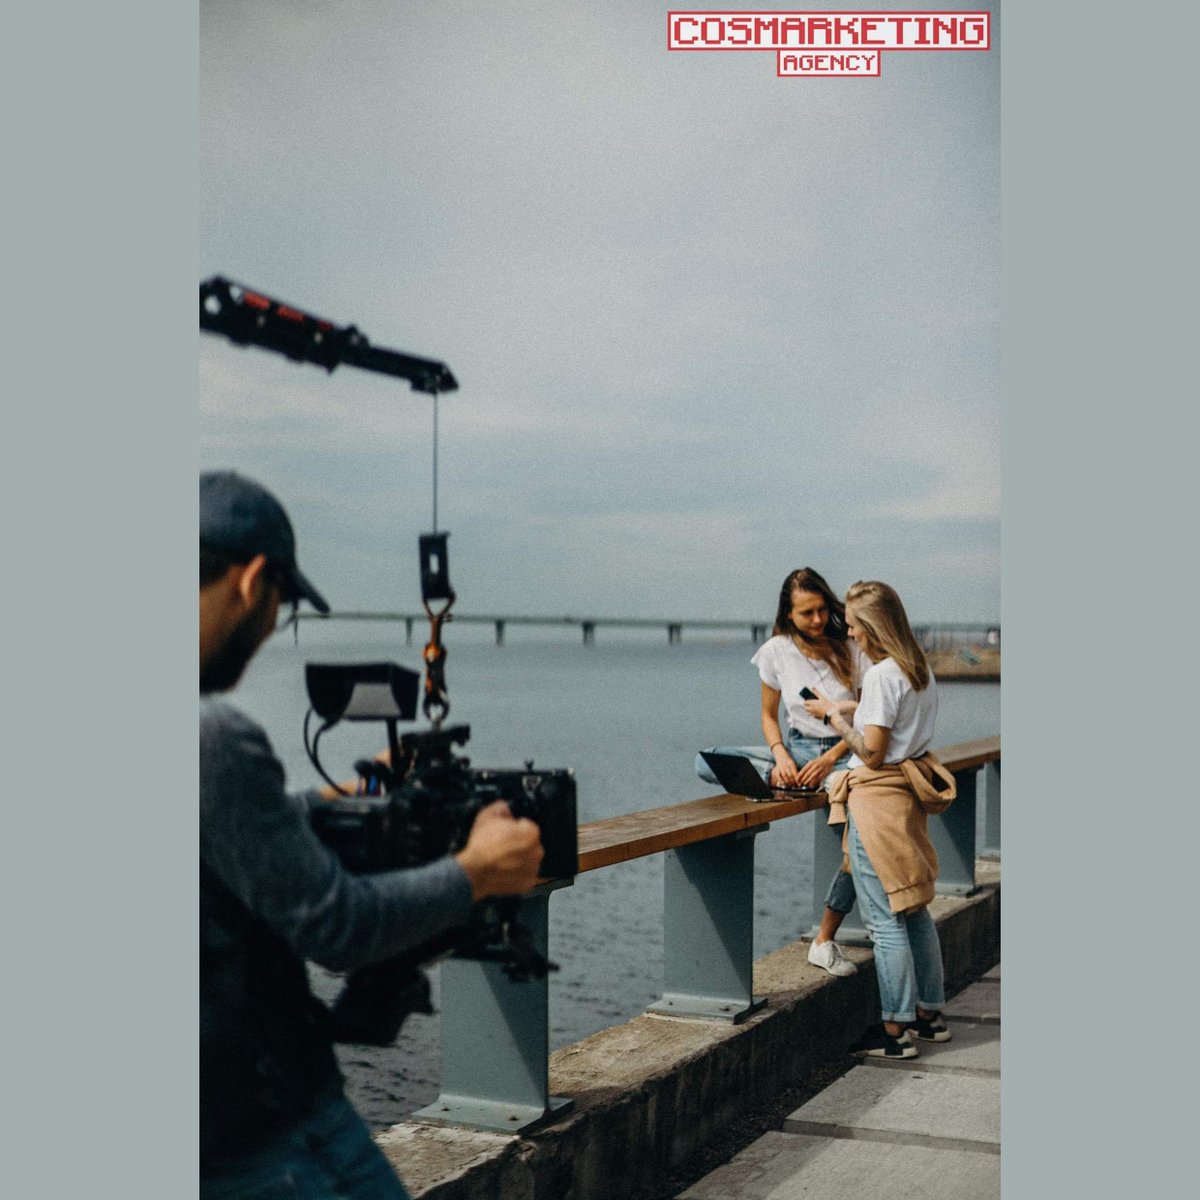 If a picture is worth a thousand words, how much more does a video say? 🧐 Videos can offer a chance to spread your message and keep the viewer engaged. 🎥  Here are some helpful tips to get you started in videography: cosmarketingagency.com/videotips 
.
.
.
.
.
#orlandovideography #video